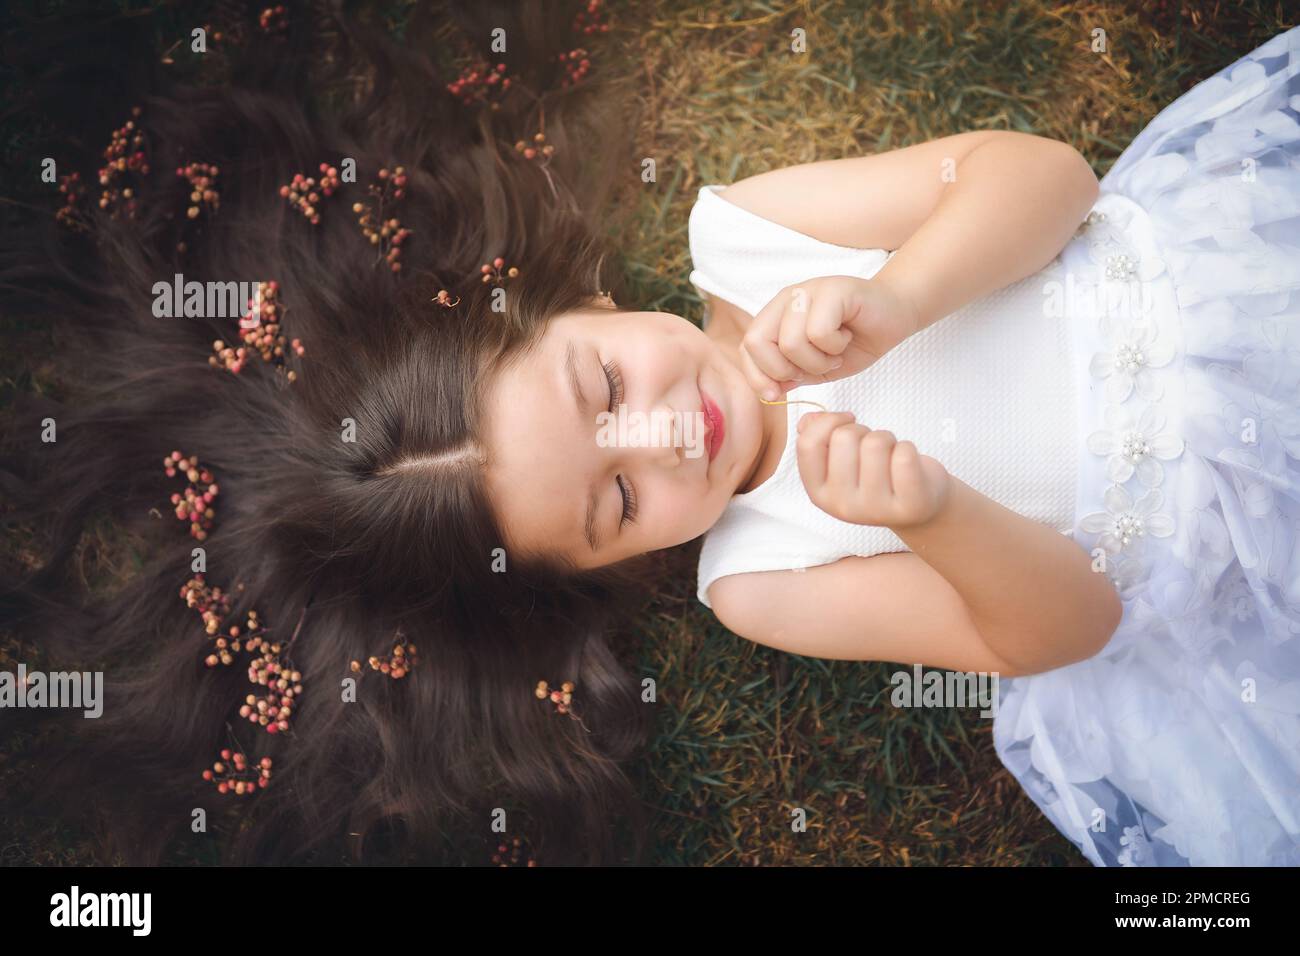 Little girl in white dress lying on the grass, she is smiling, her hair is very long and princess-like, she plays with her hands on the theme of child Stock Photo